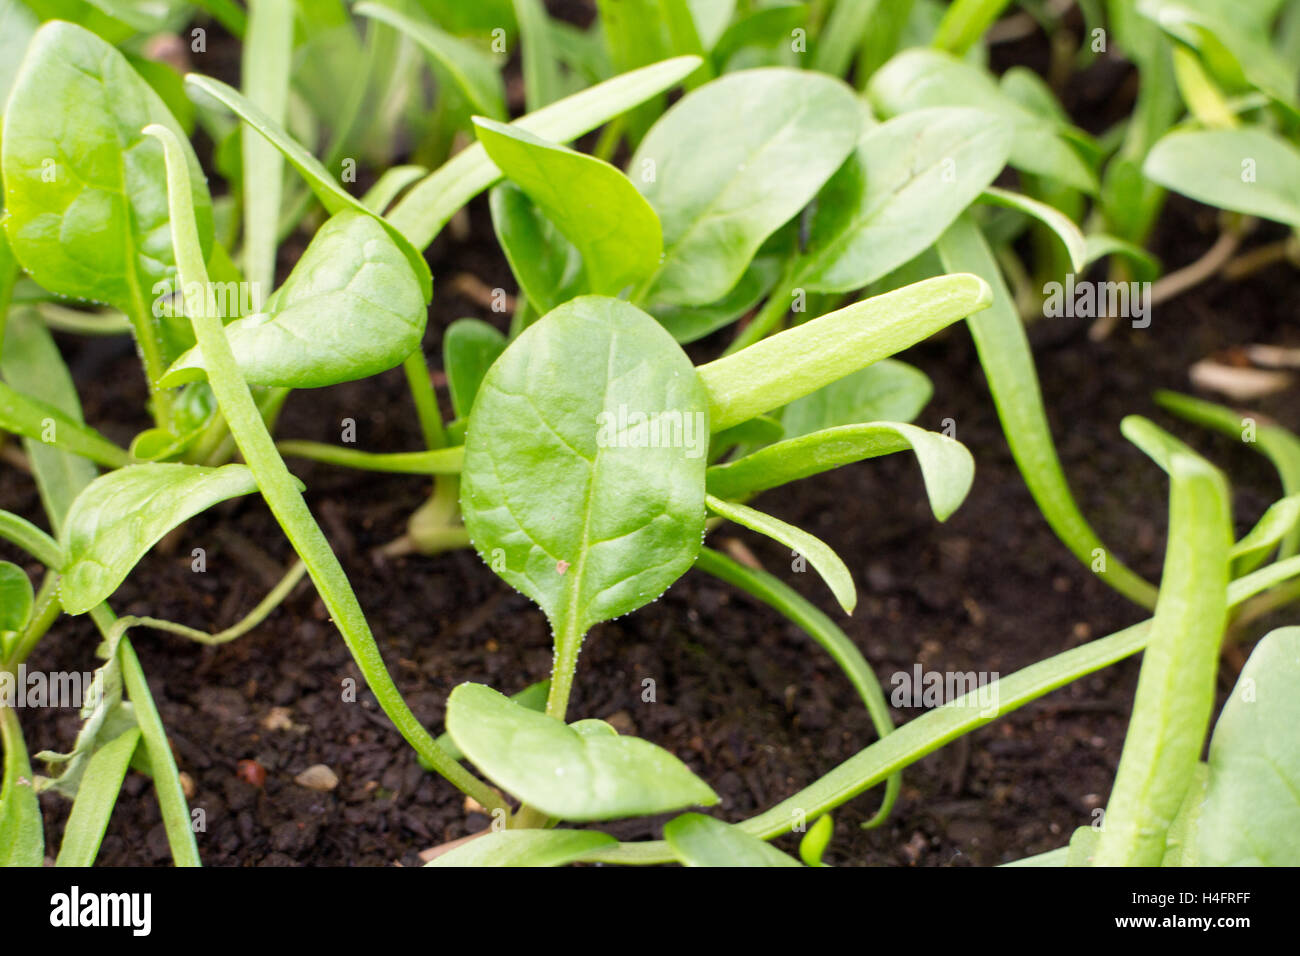 Spinach greens baby growing in a transplant tray, farm inspired Stock Photo